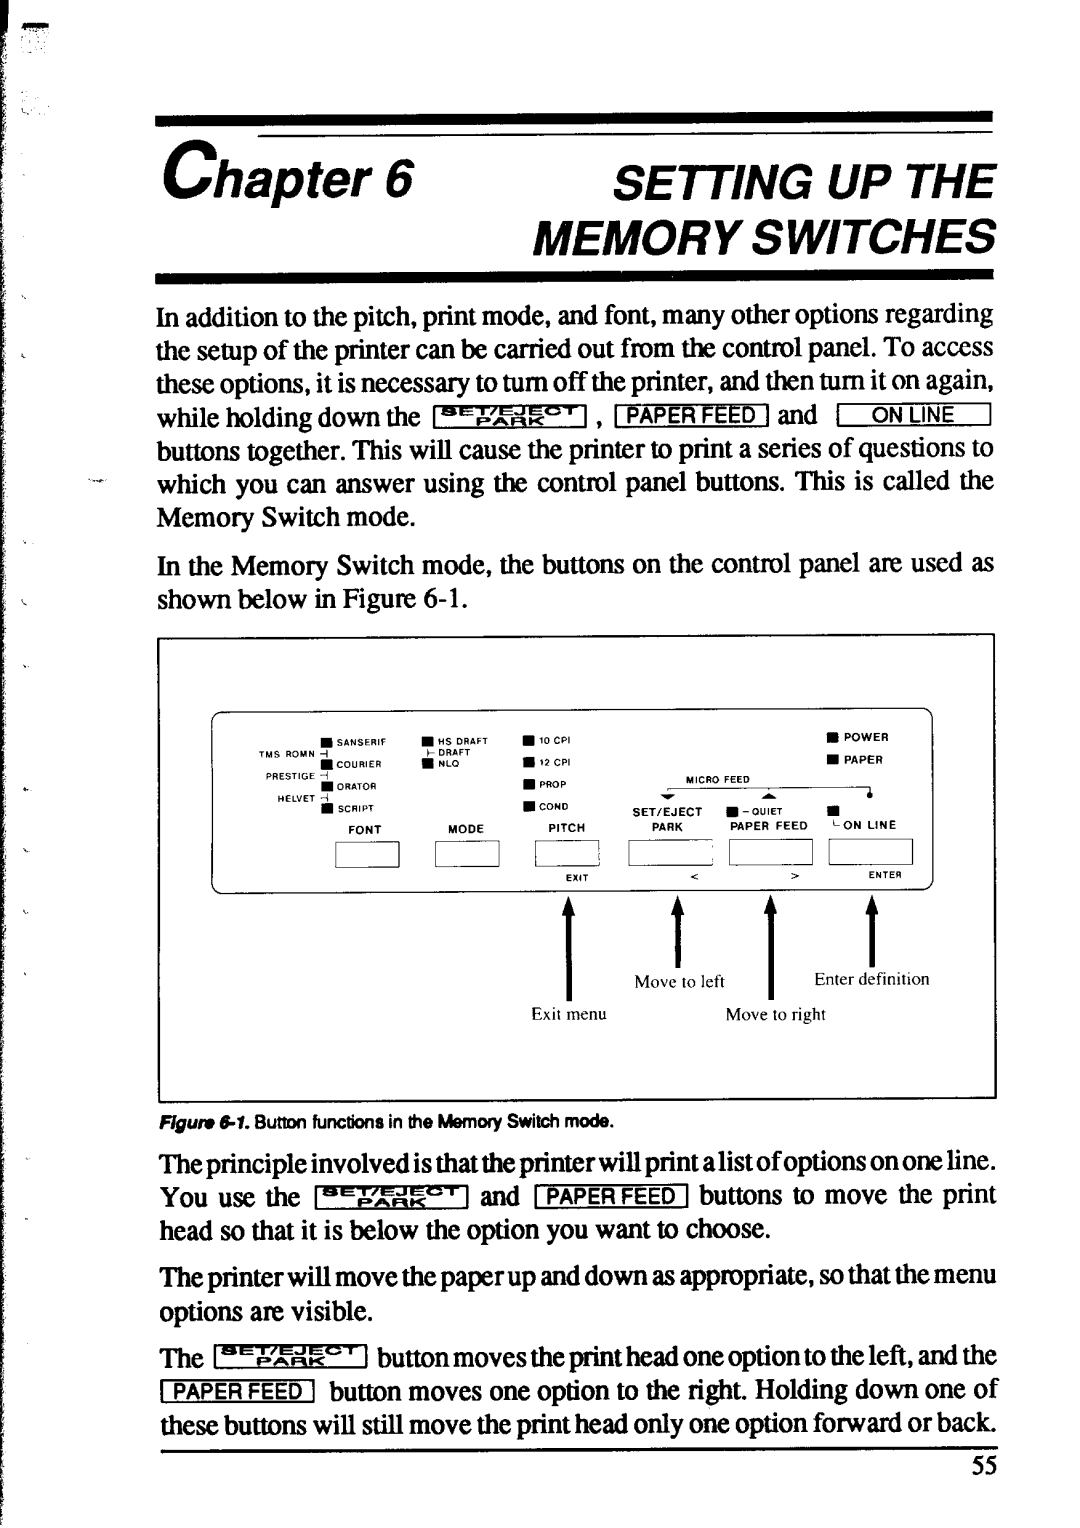 Star Micronics XR-1520, XR-1020 manual chapter, Setting Up The, Memory Switches 